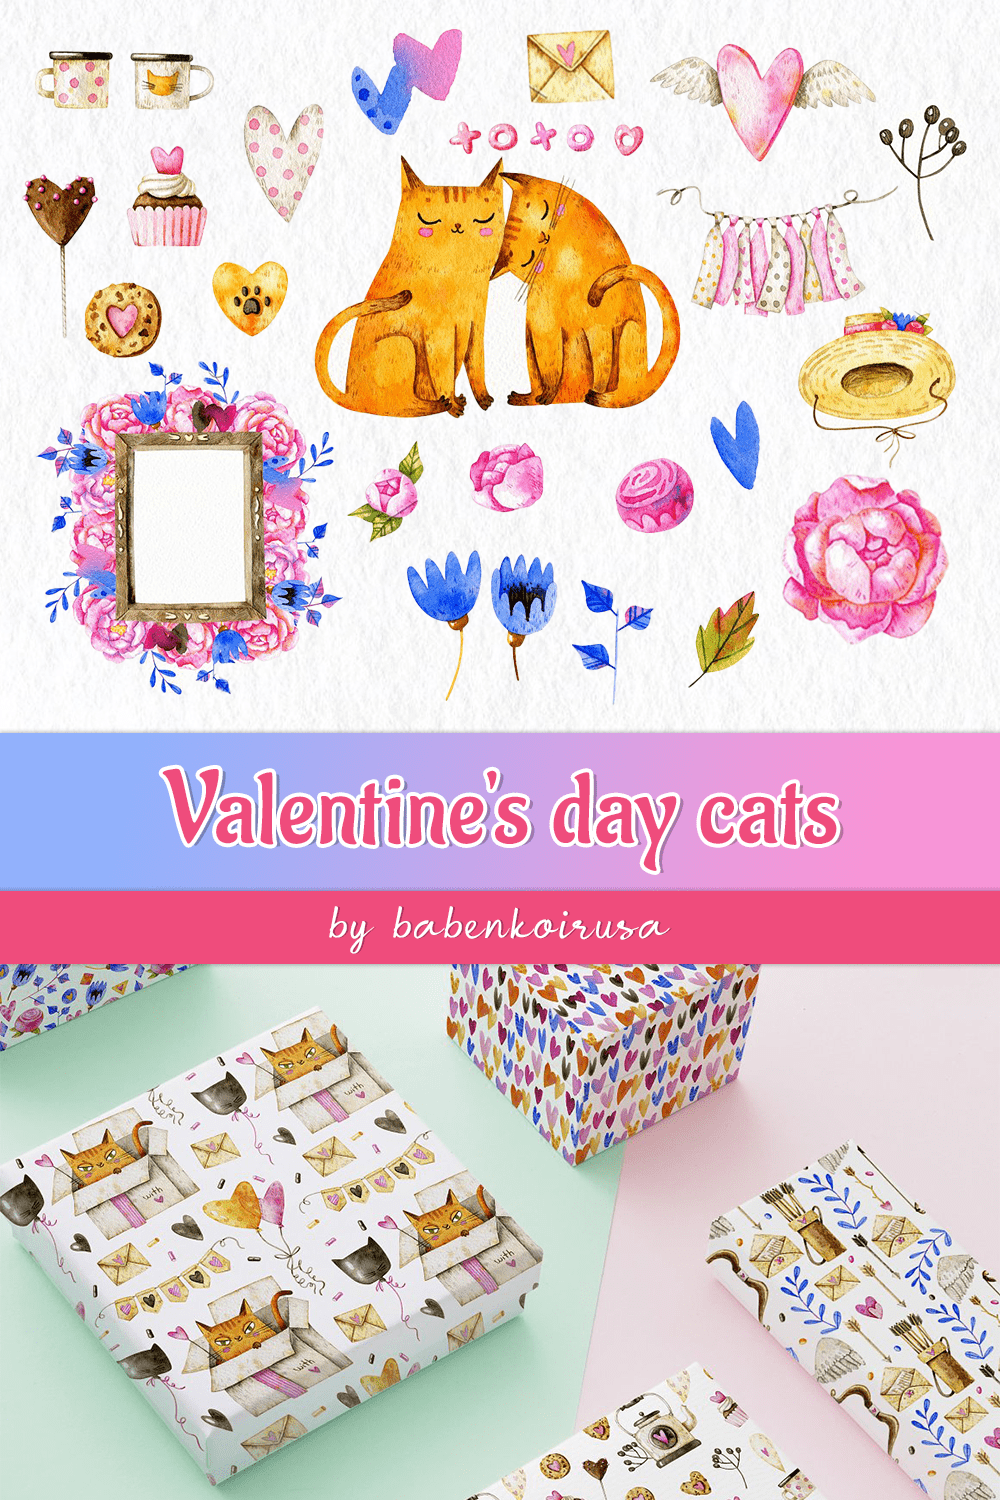 Valentine's day cats - pinterest image preview.